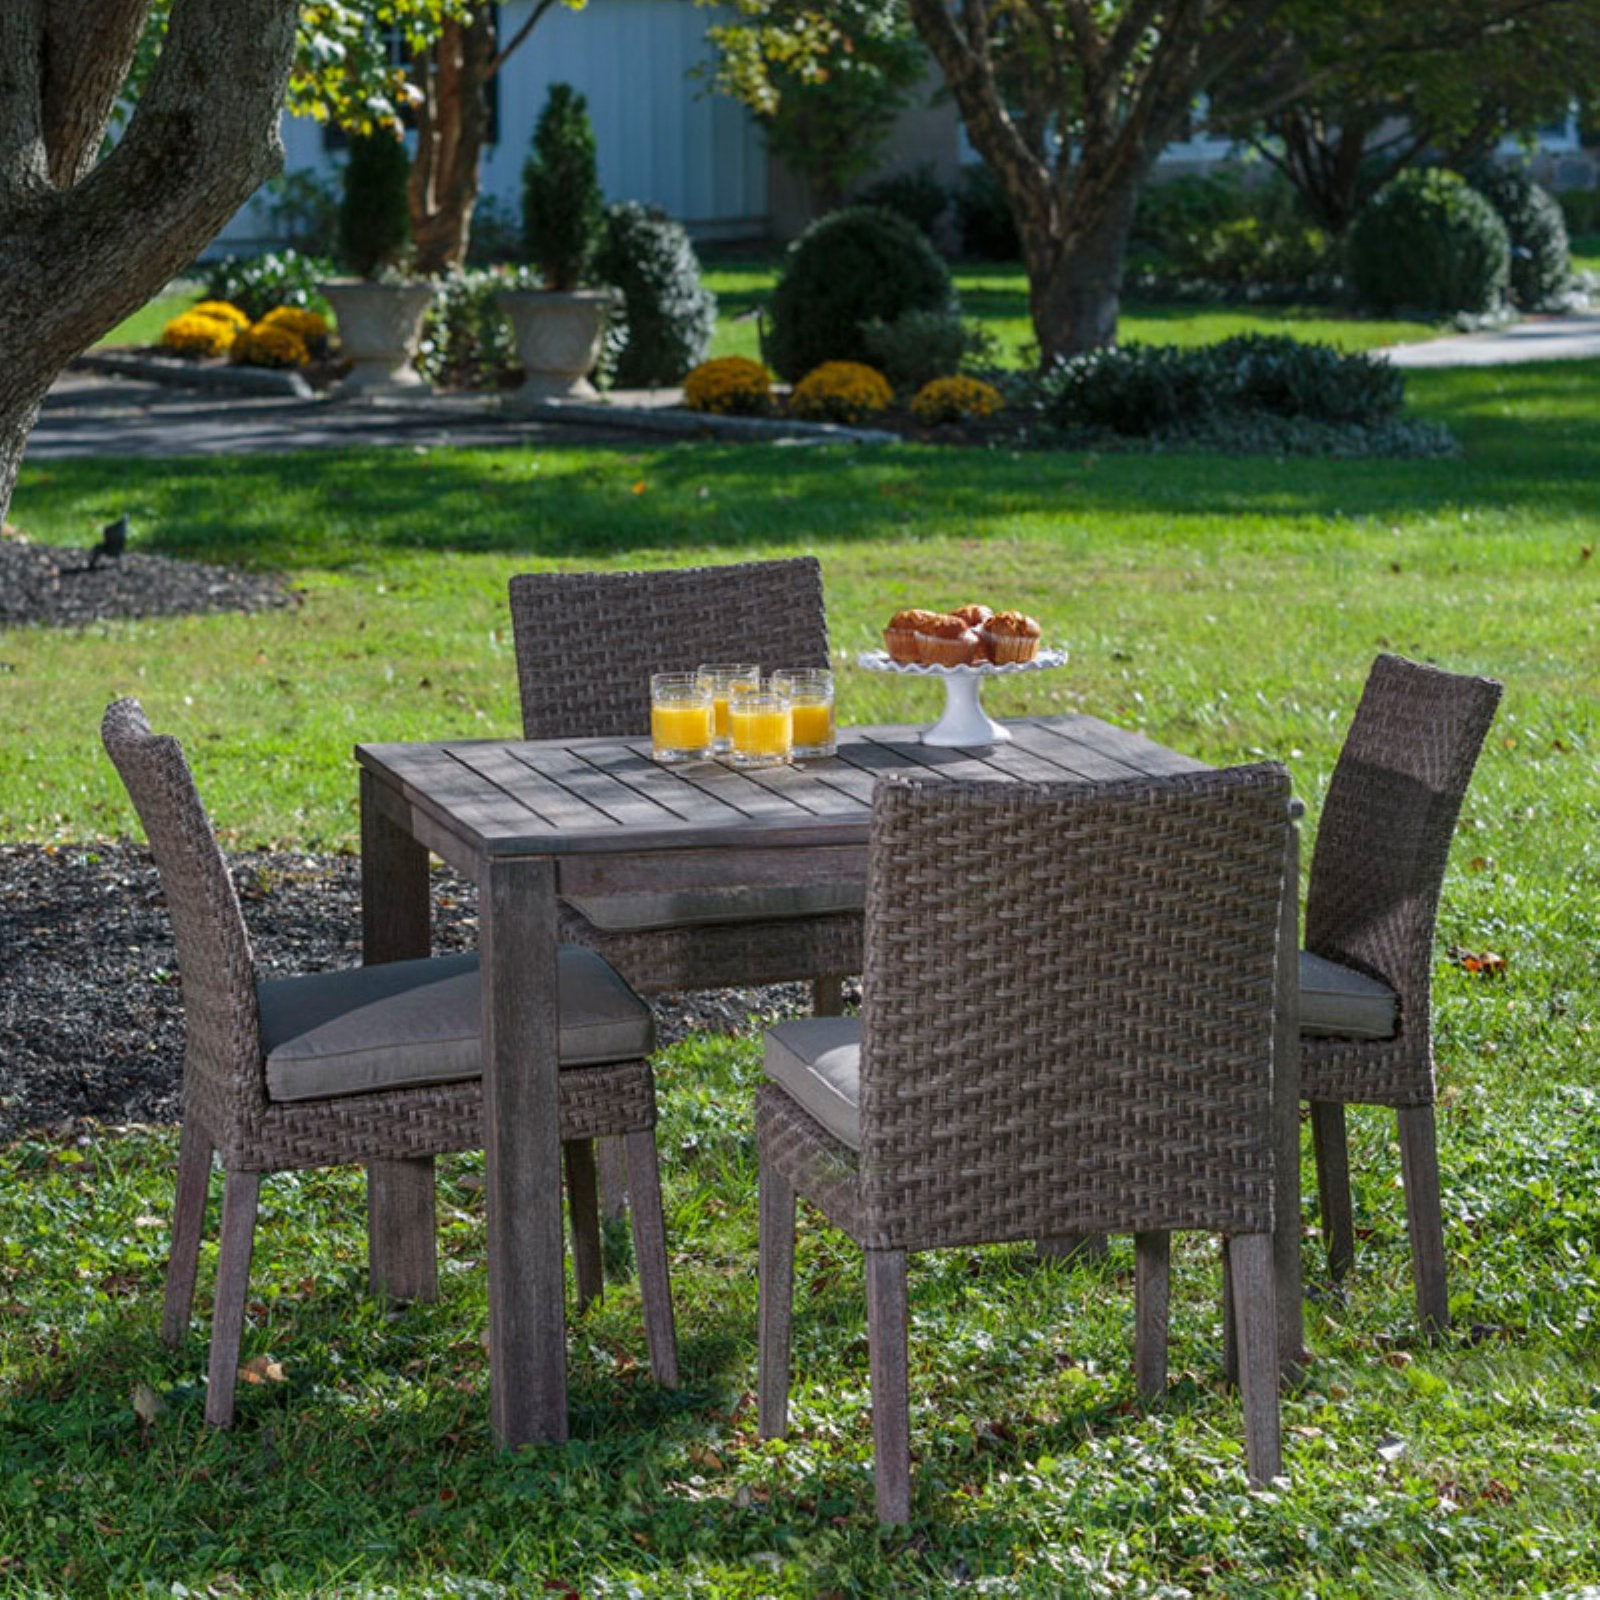 Alfresco Home Cornwall 5 Piece Woven Wood Patio Dining Set